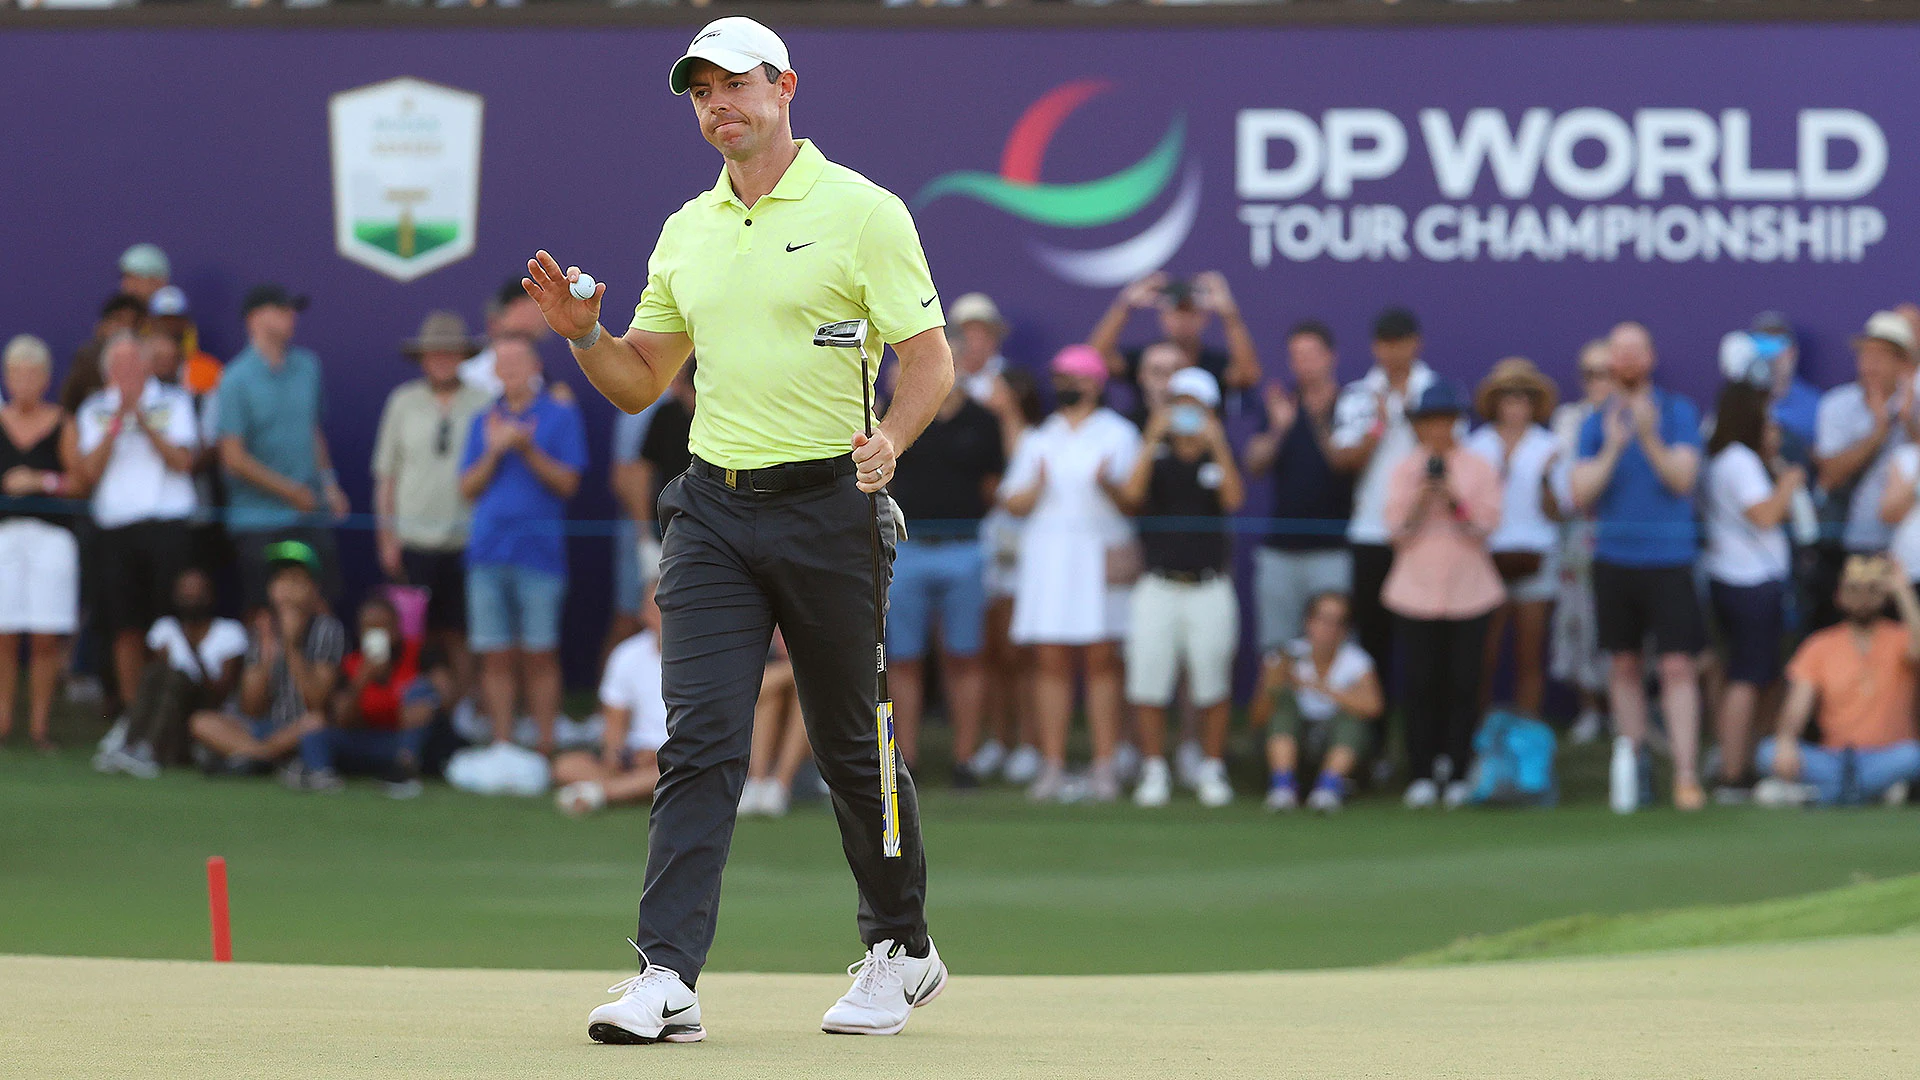 Rory McIlroy double-bogeys final hole to lose lead at DP World Tour Championship